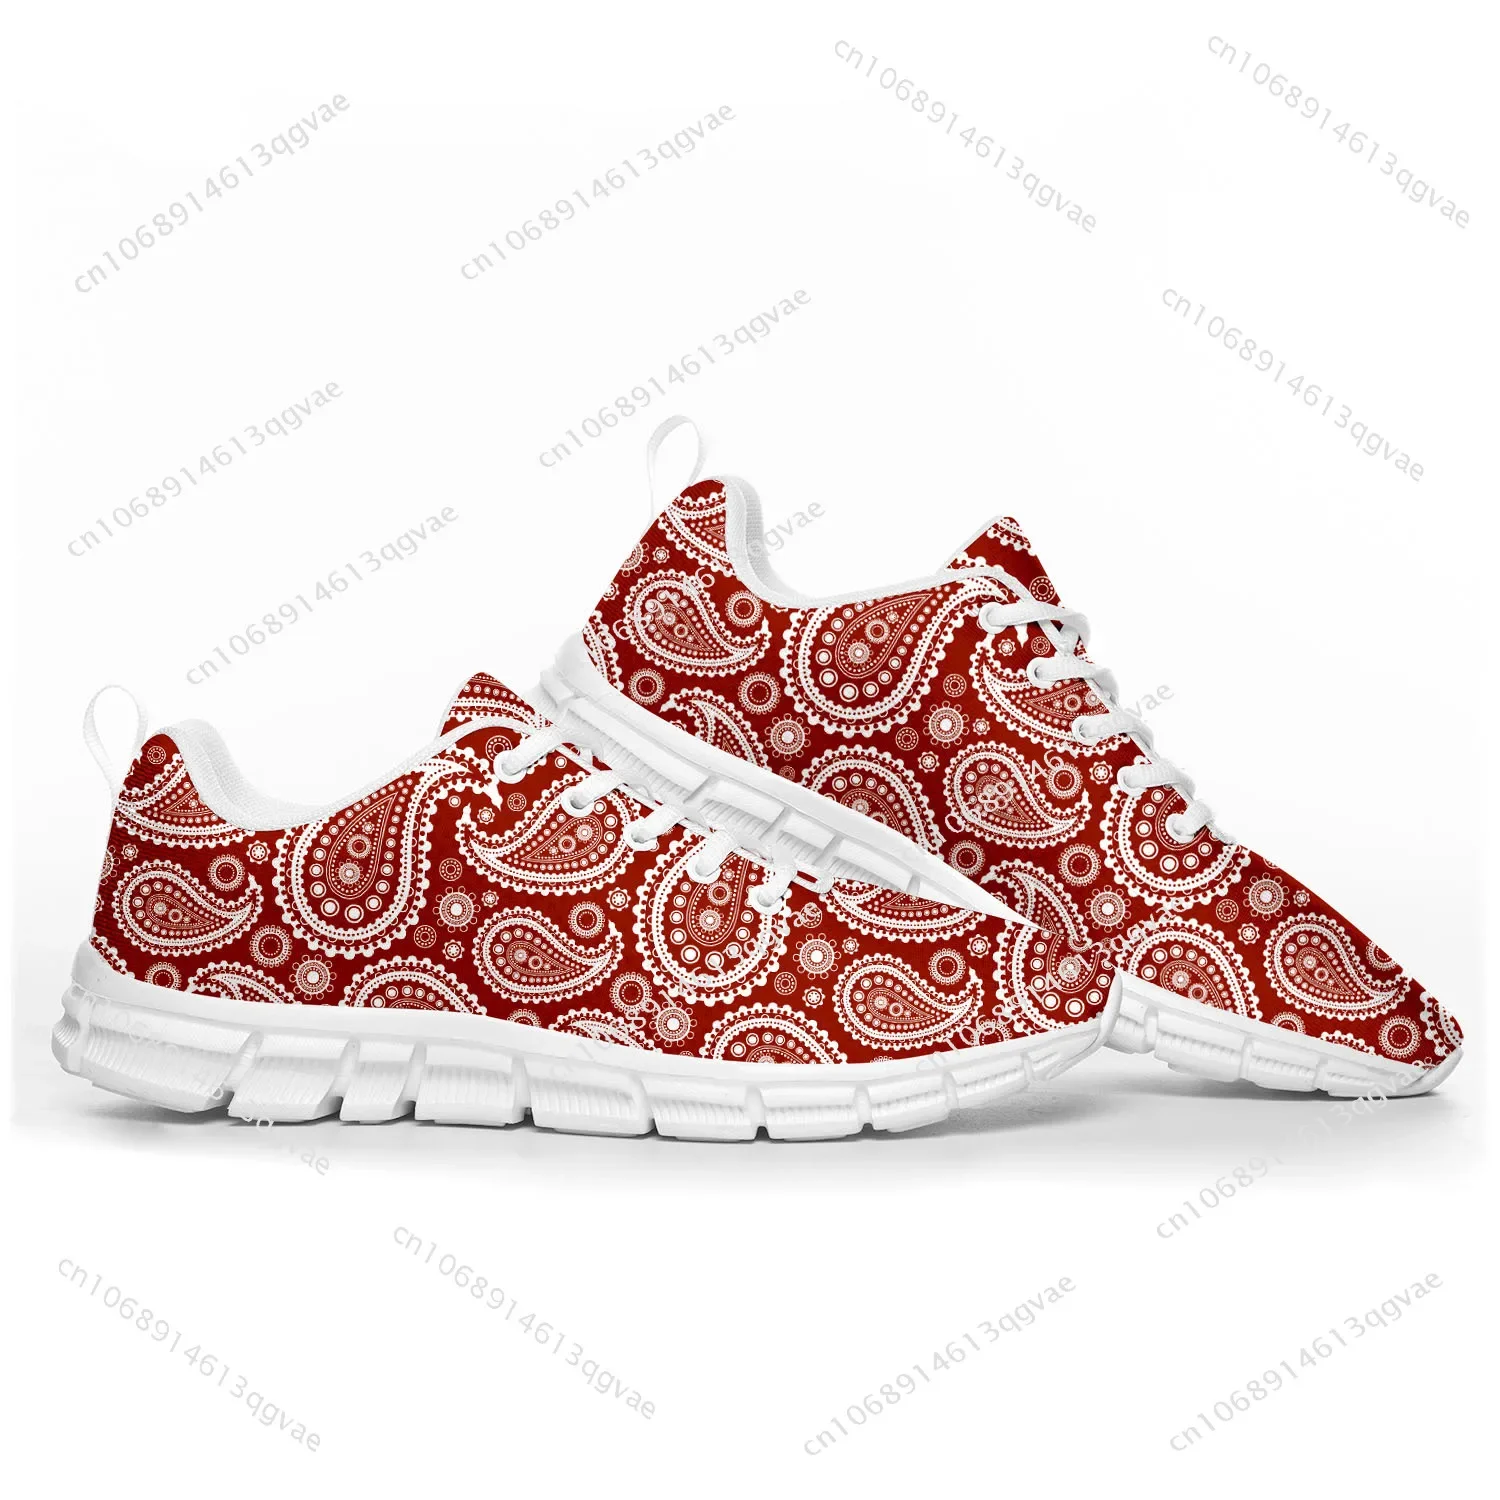 

Paisley Print Sports Shoes Mens Womens Teenager Kids Children Customized Sneakers Tailor Made Shoe High Quality Couple White